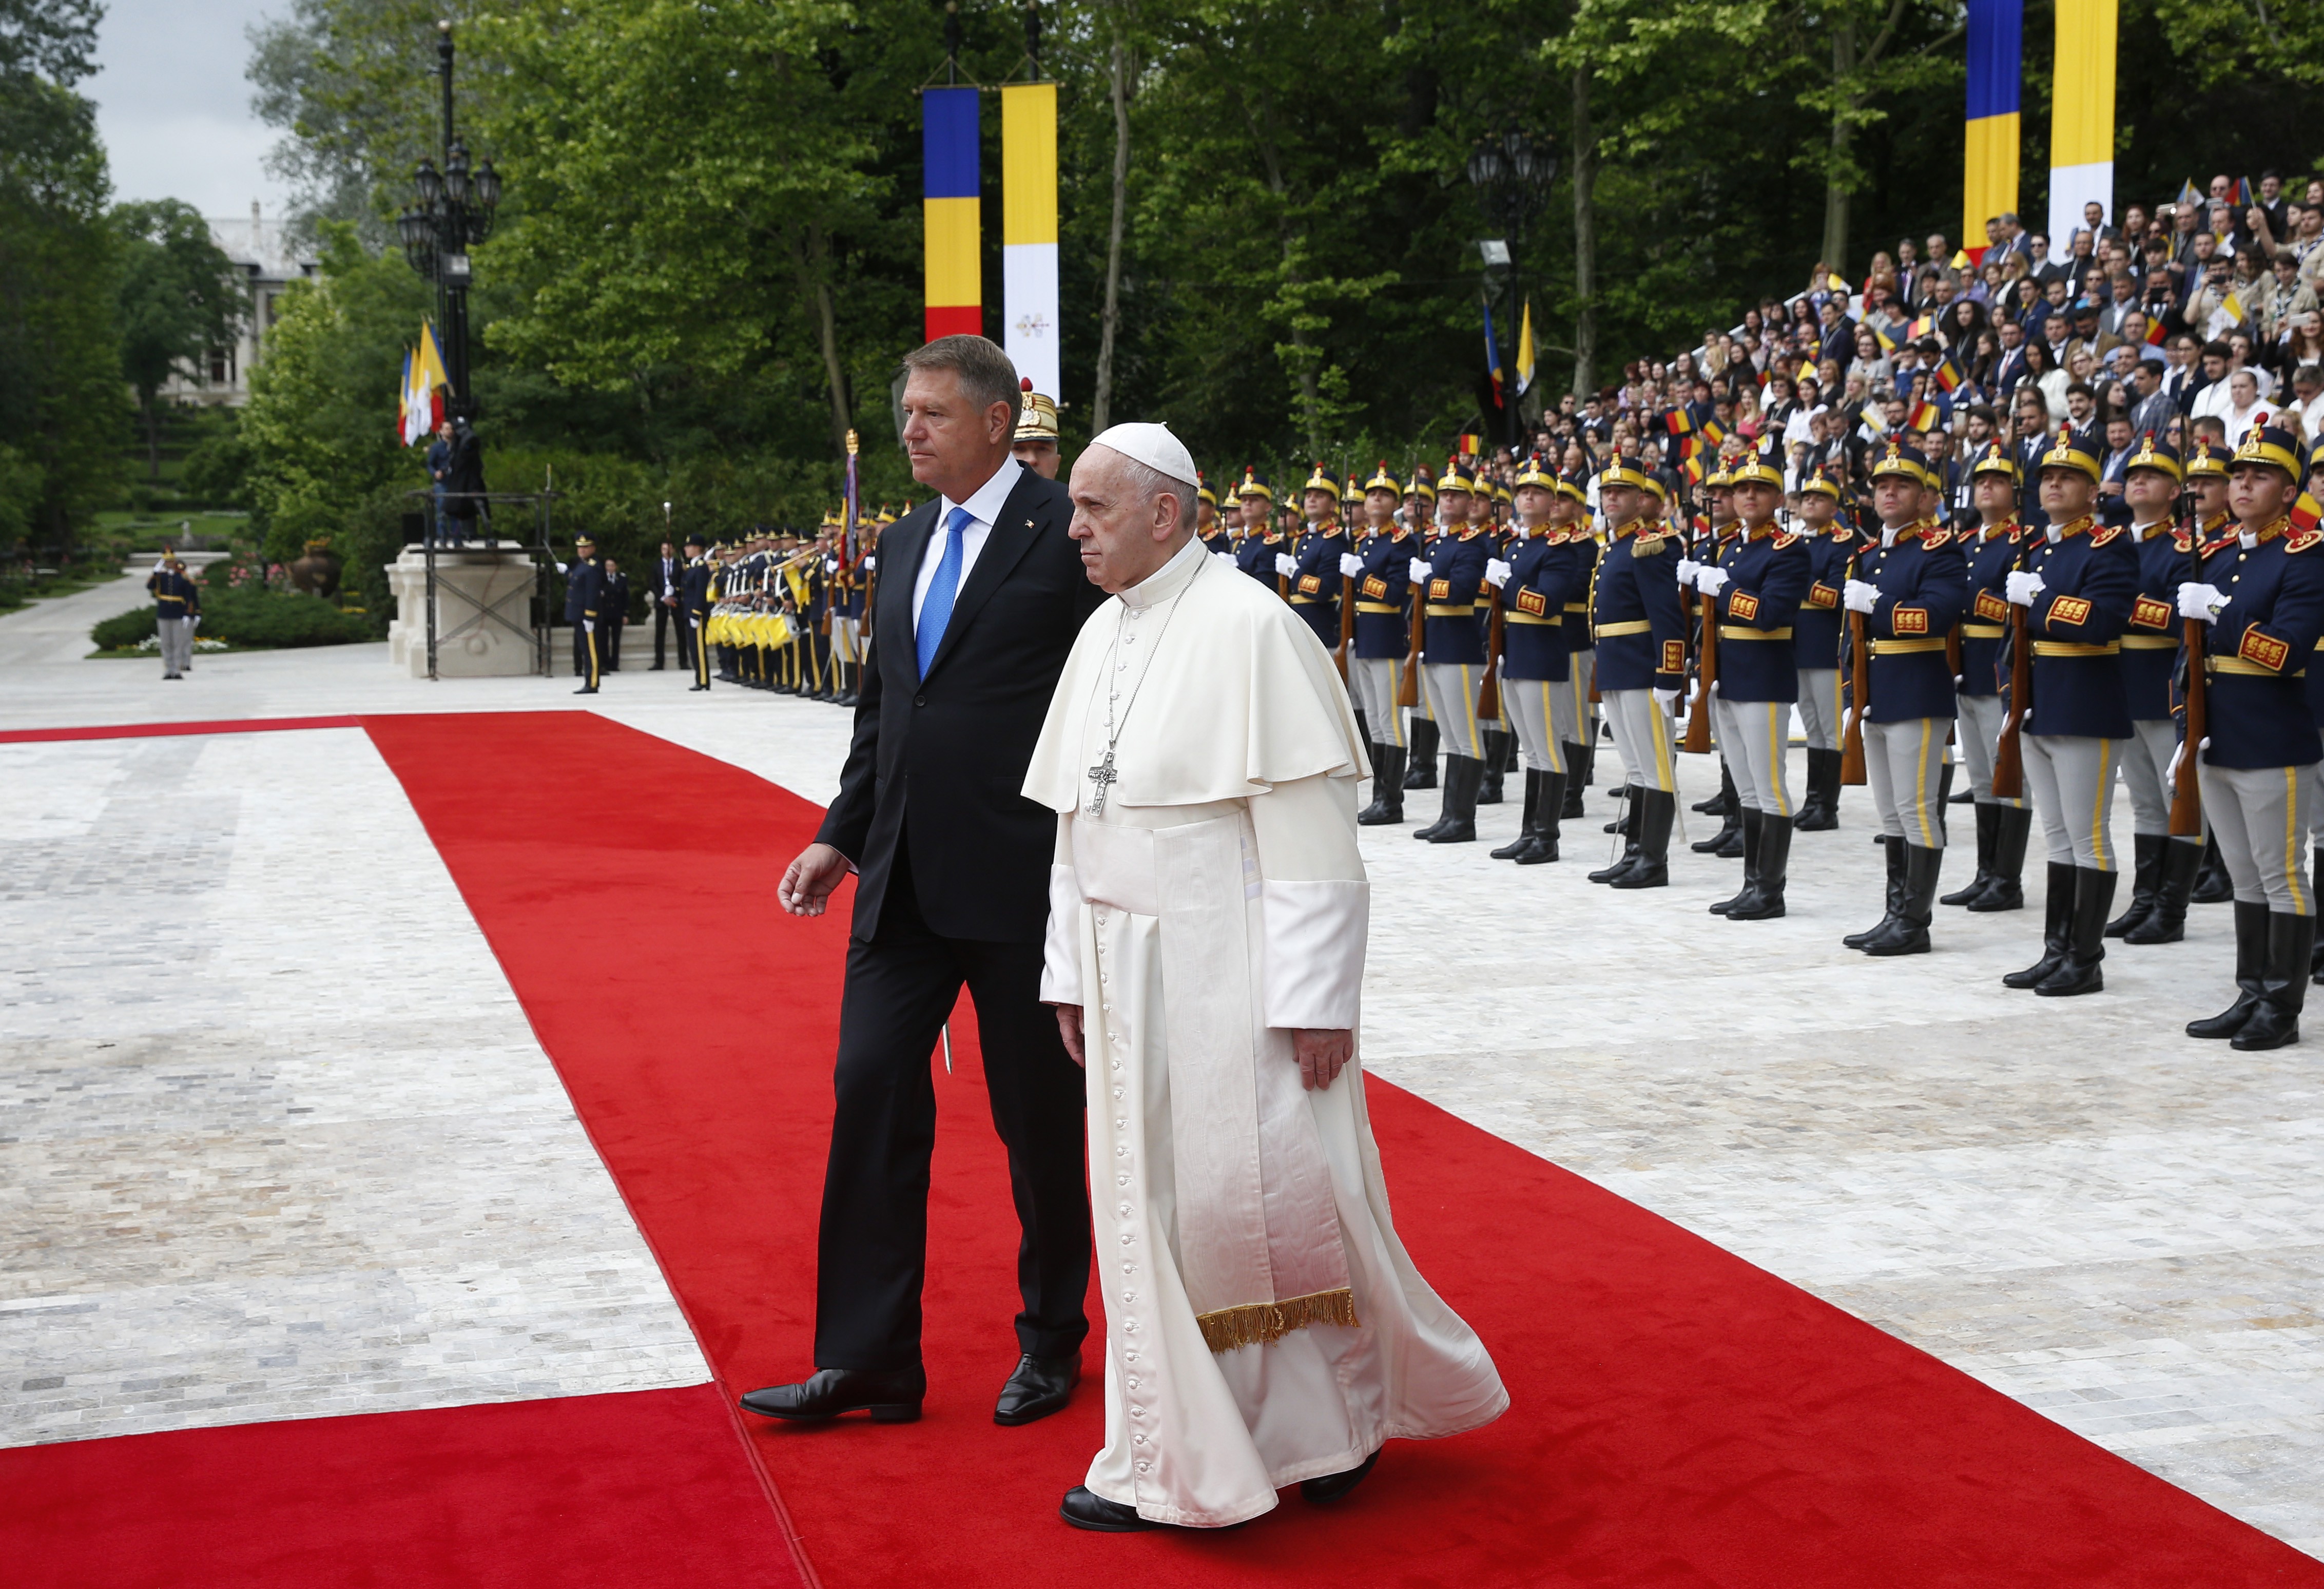 Pope urges Romanian leaders to care for country's poor, disadvantaged